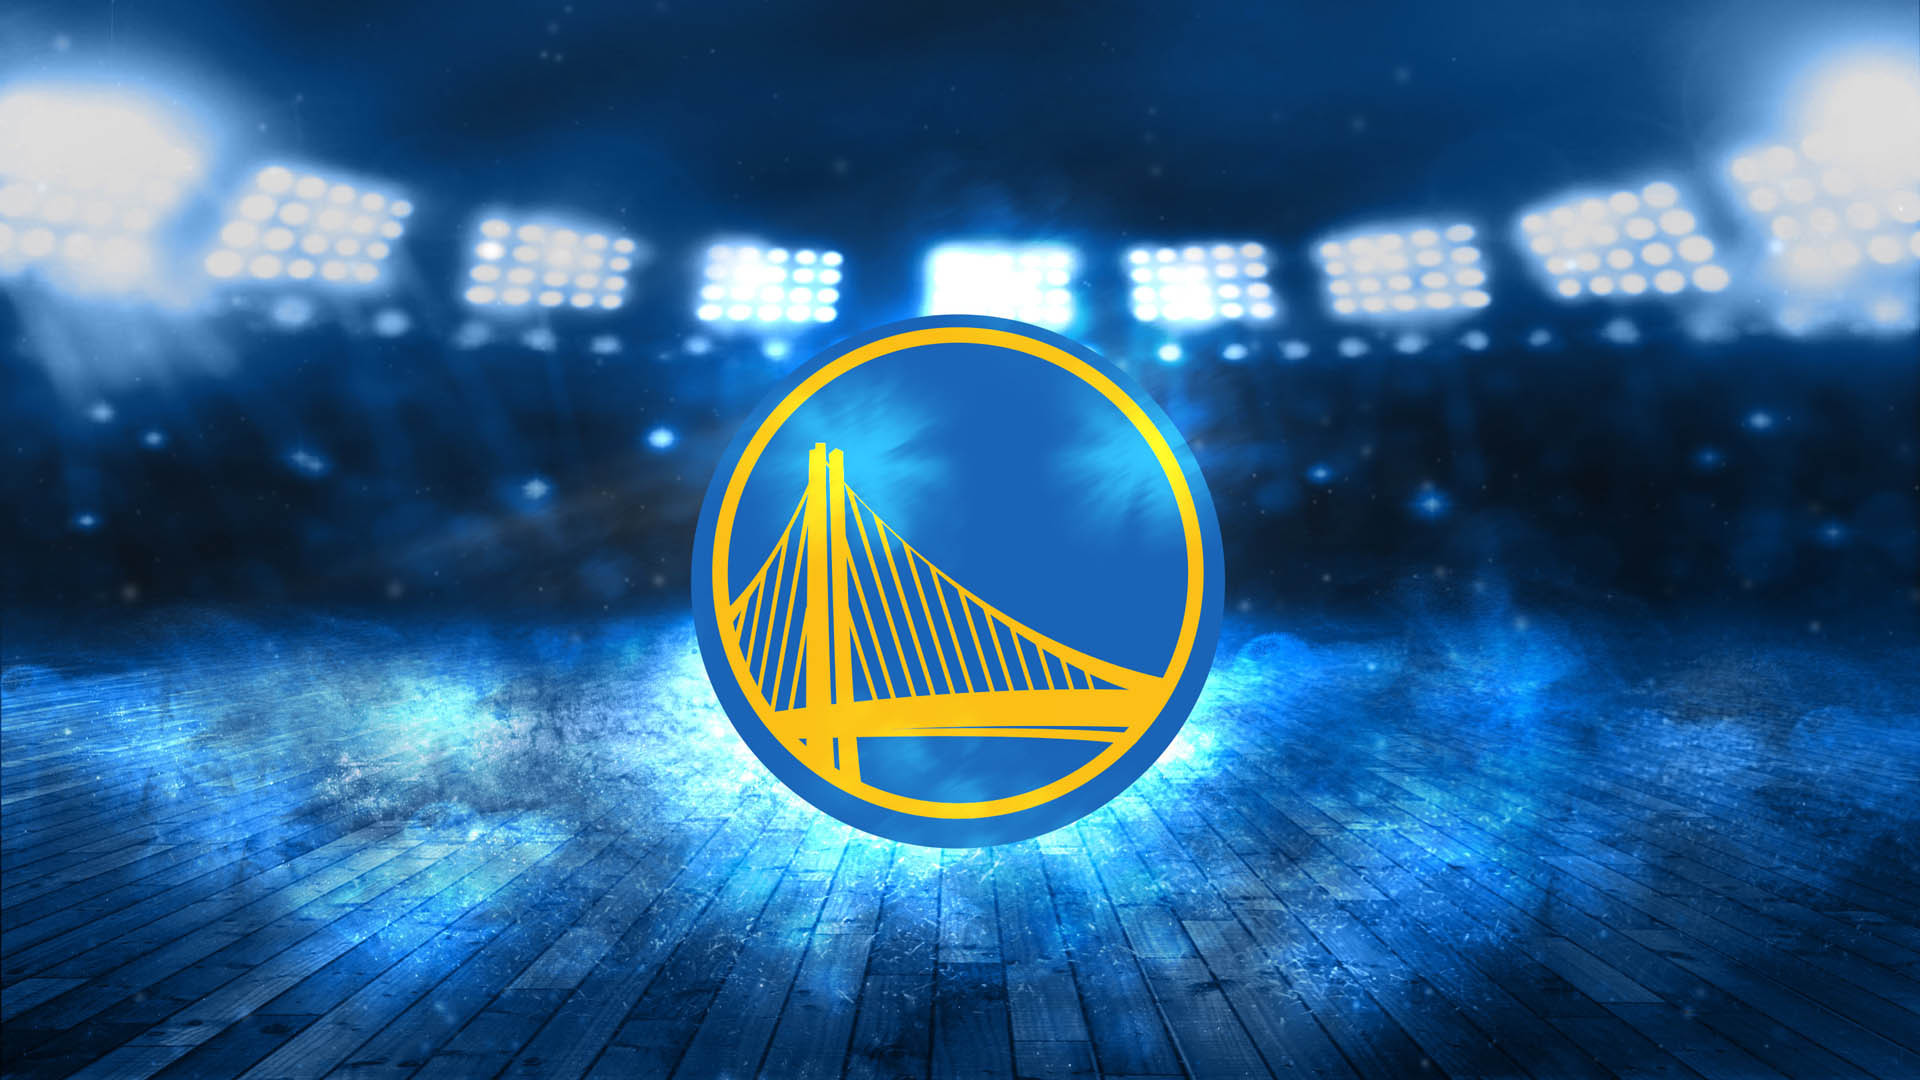 Golden State Warriors Wallpaper Image Photos Pictures